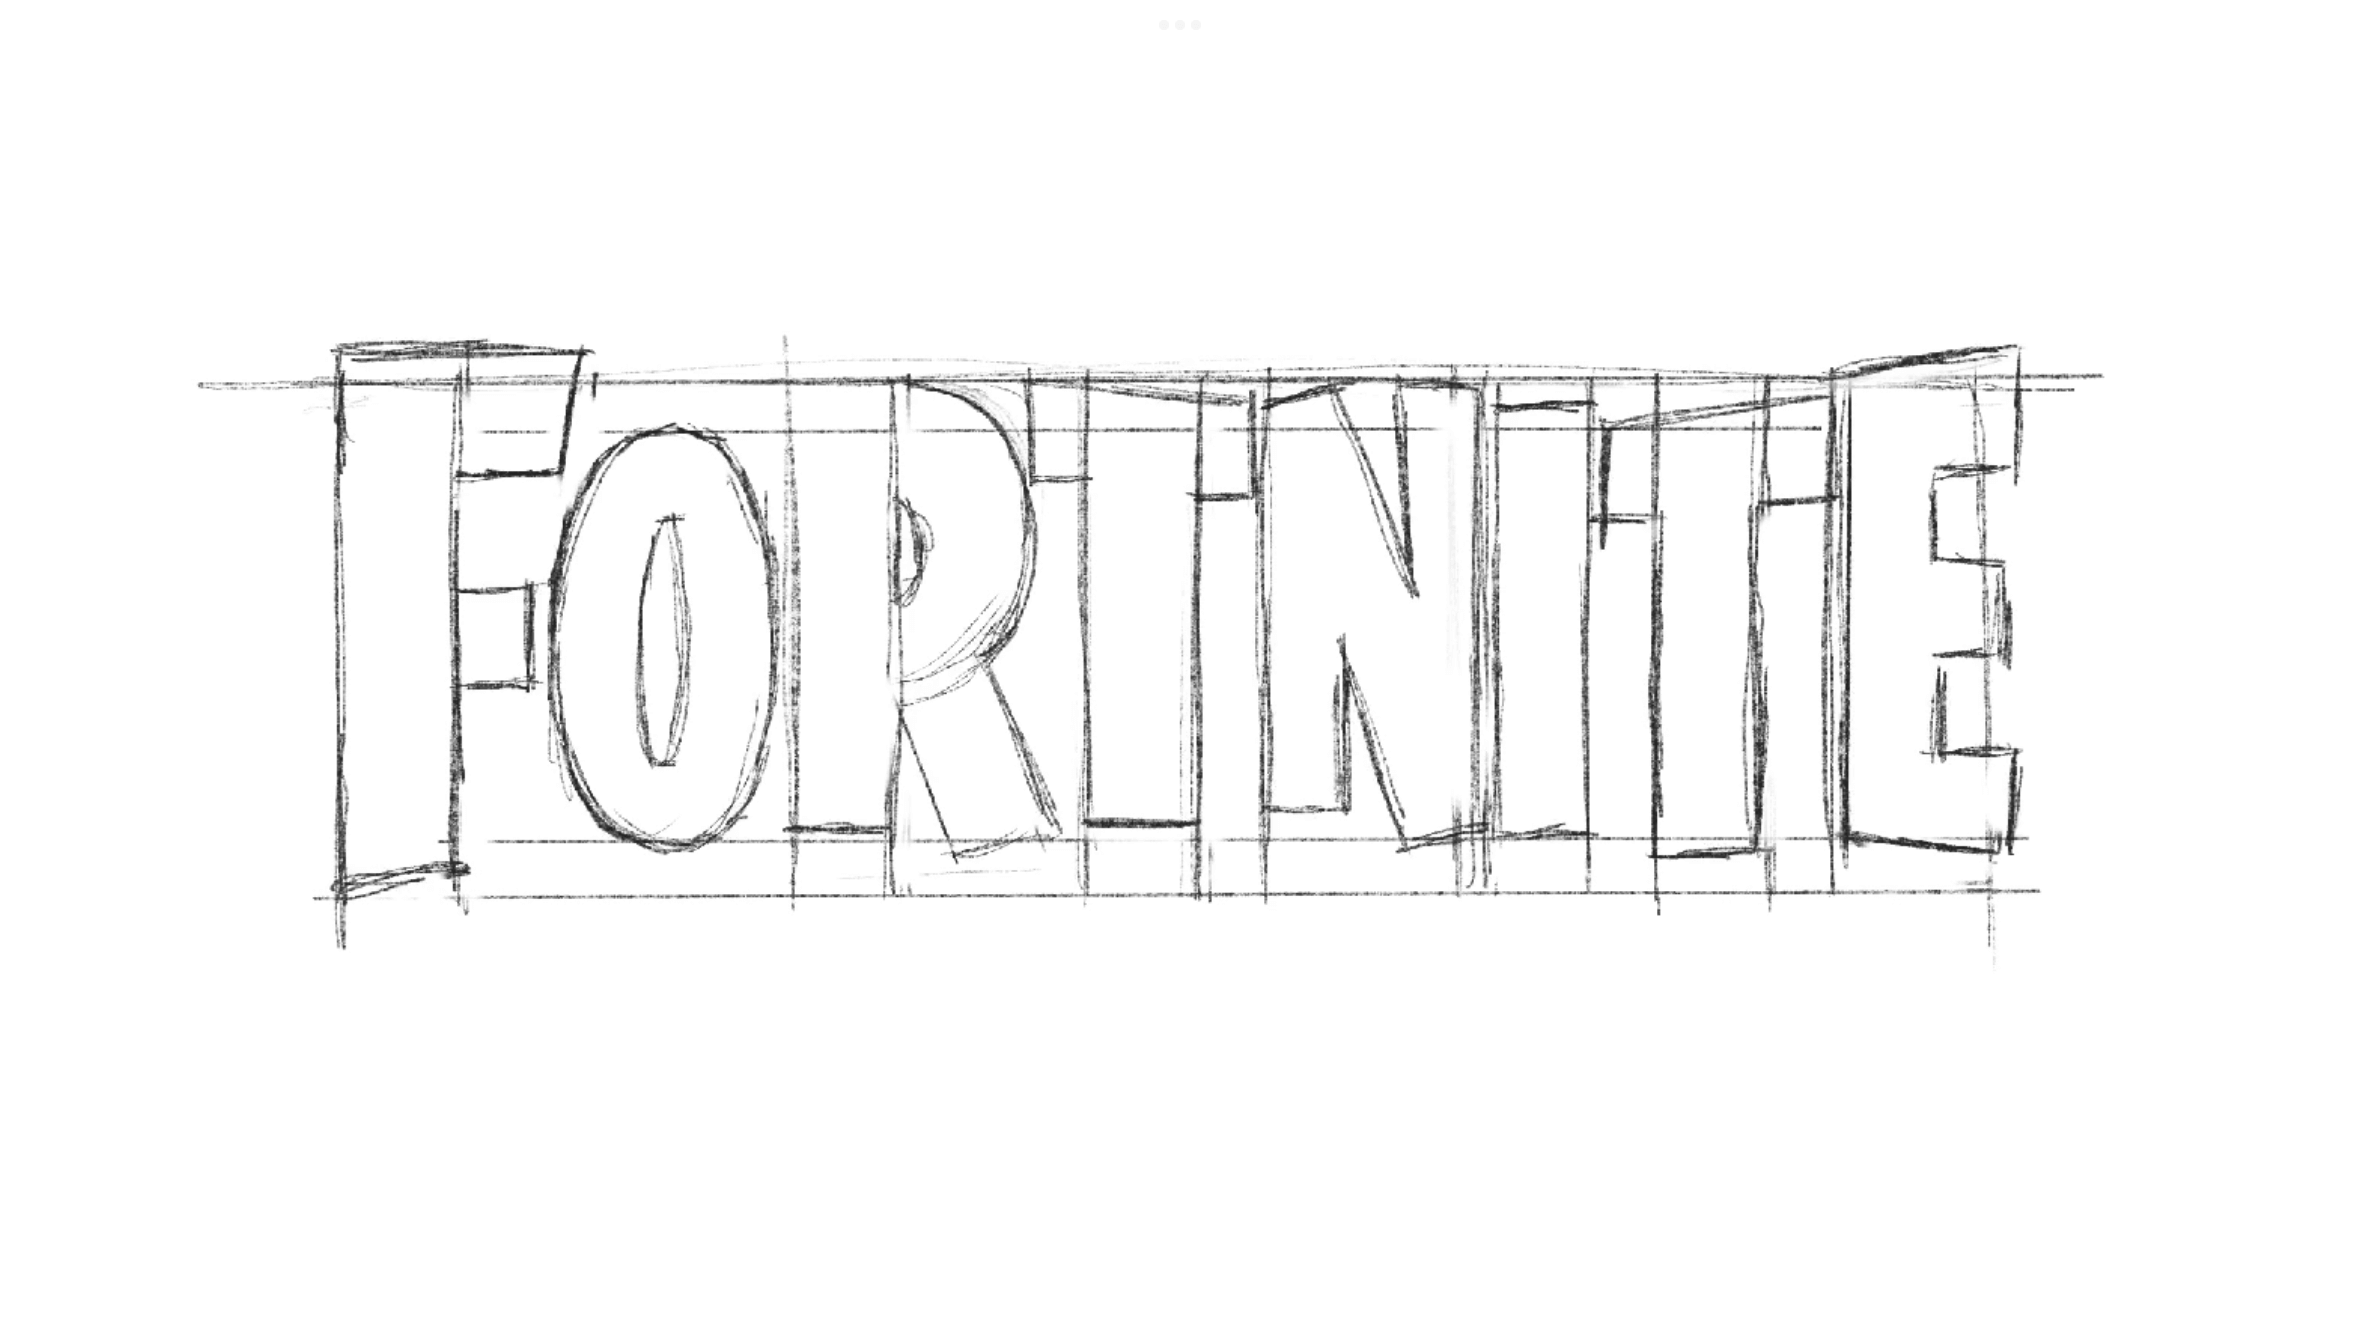 Step 3 of drawing the Fortnite logo: Draw the letters inside the outlines